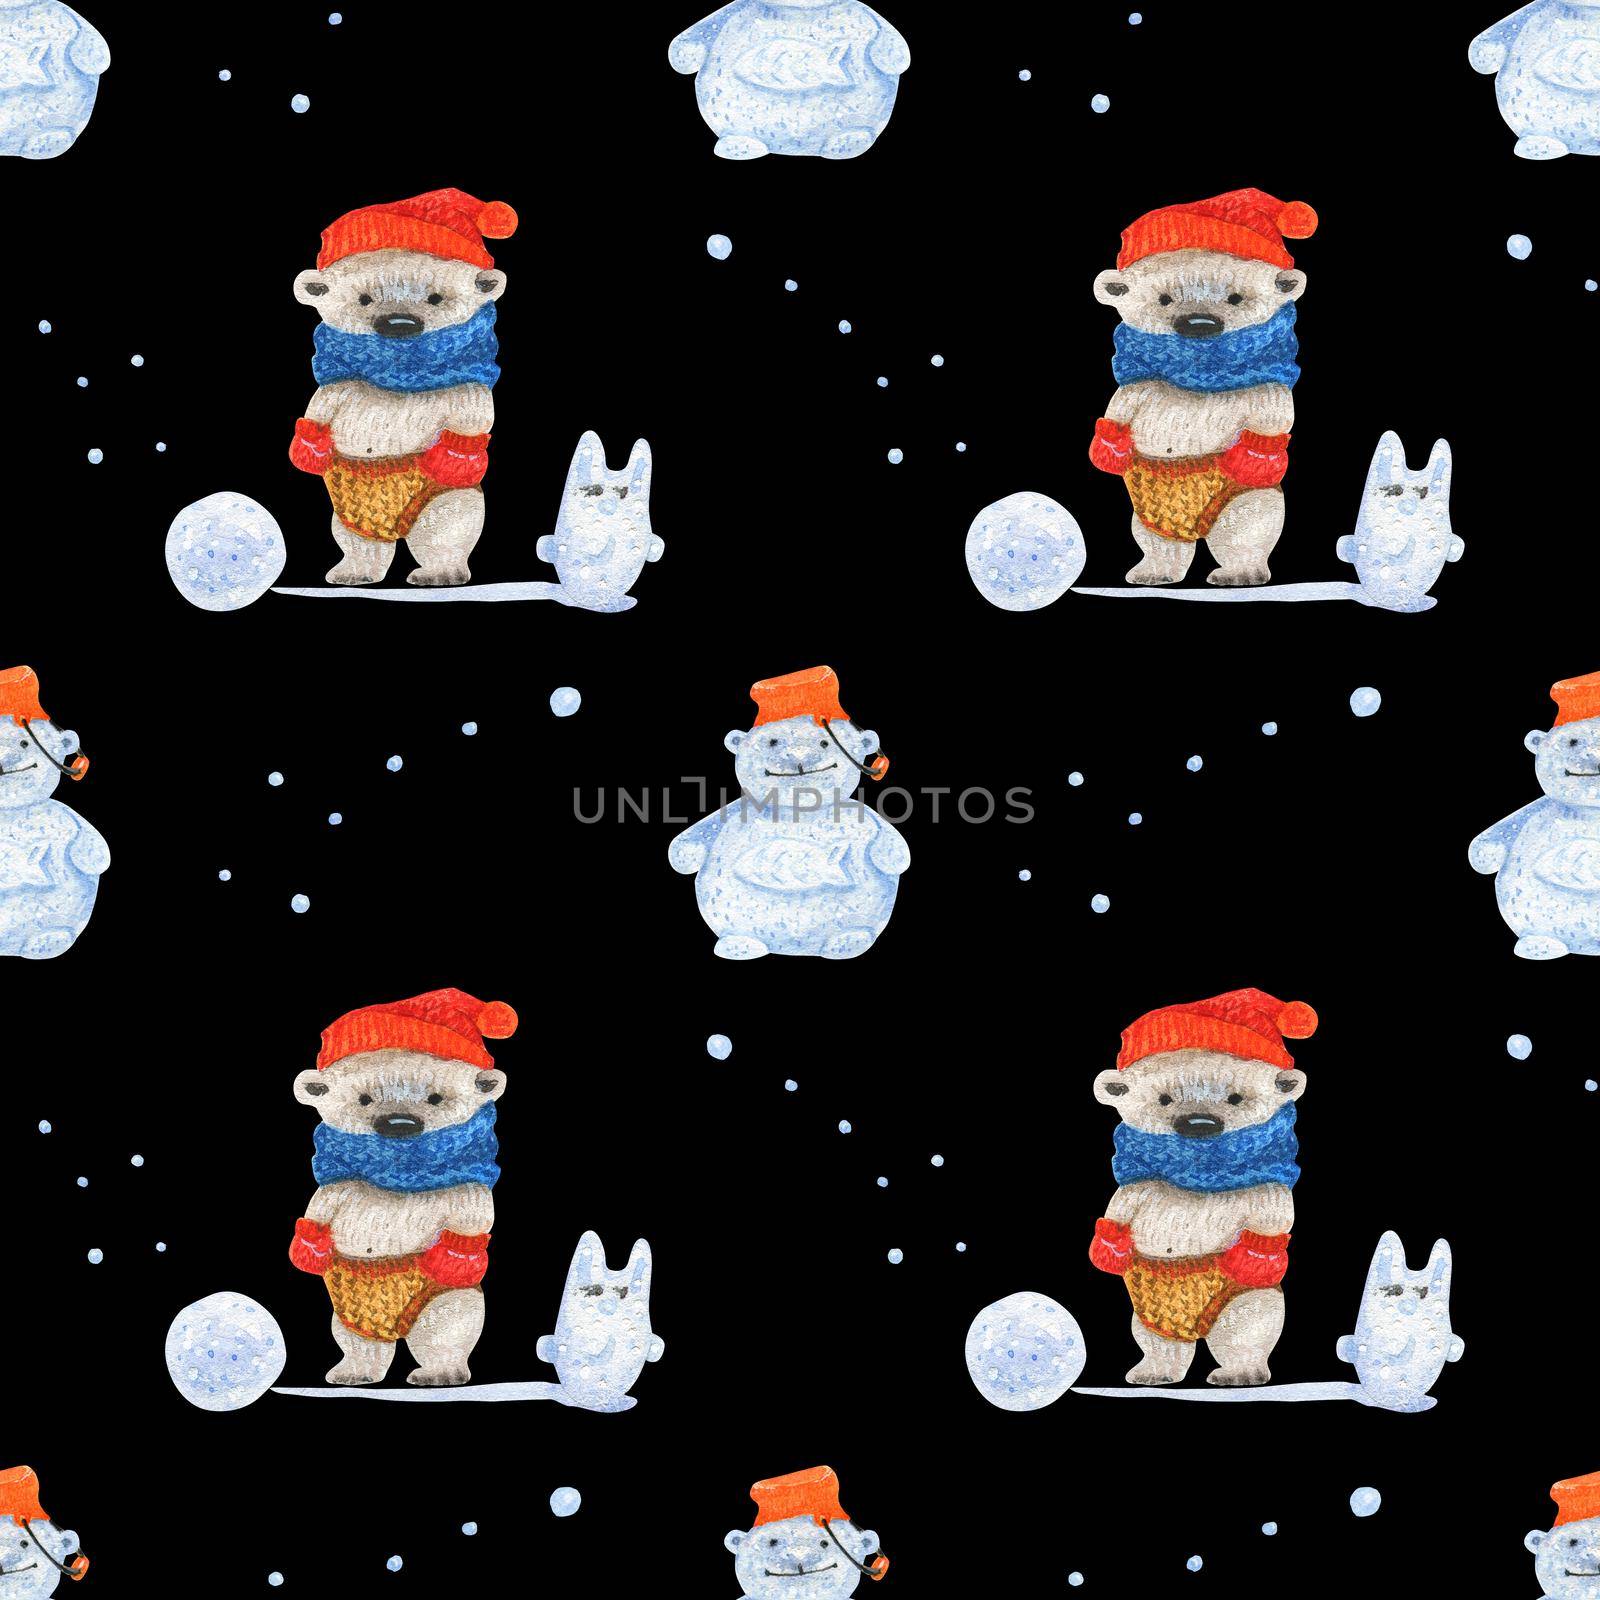 Little polar bear sculpt snowman. Watercolor seamless patterns for textile, wrapping paper and any tiled design. Black background, clipping path uncluded